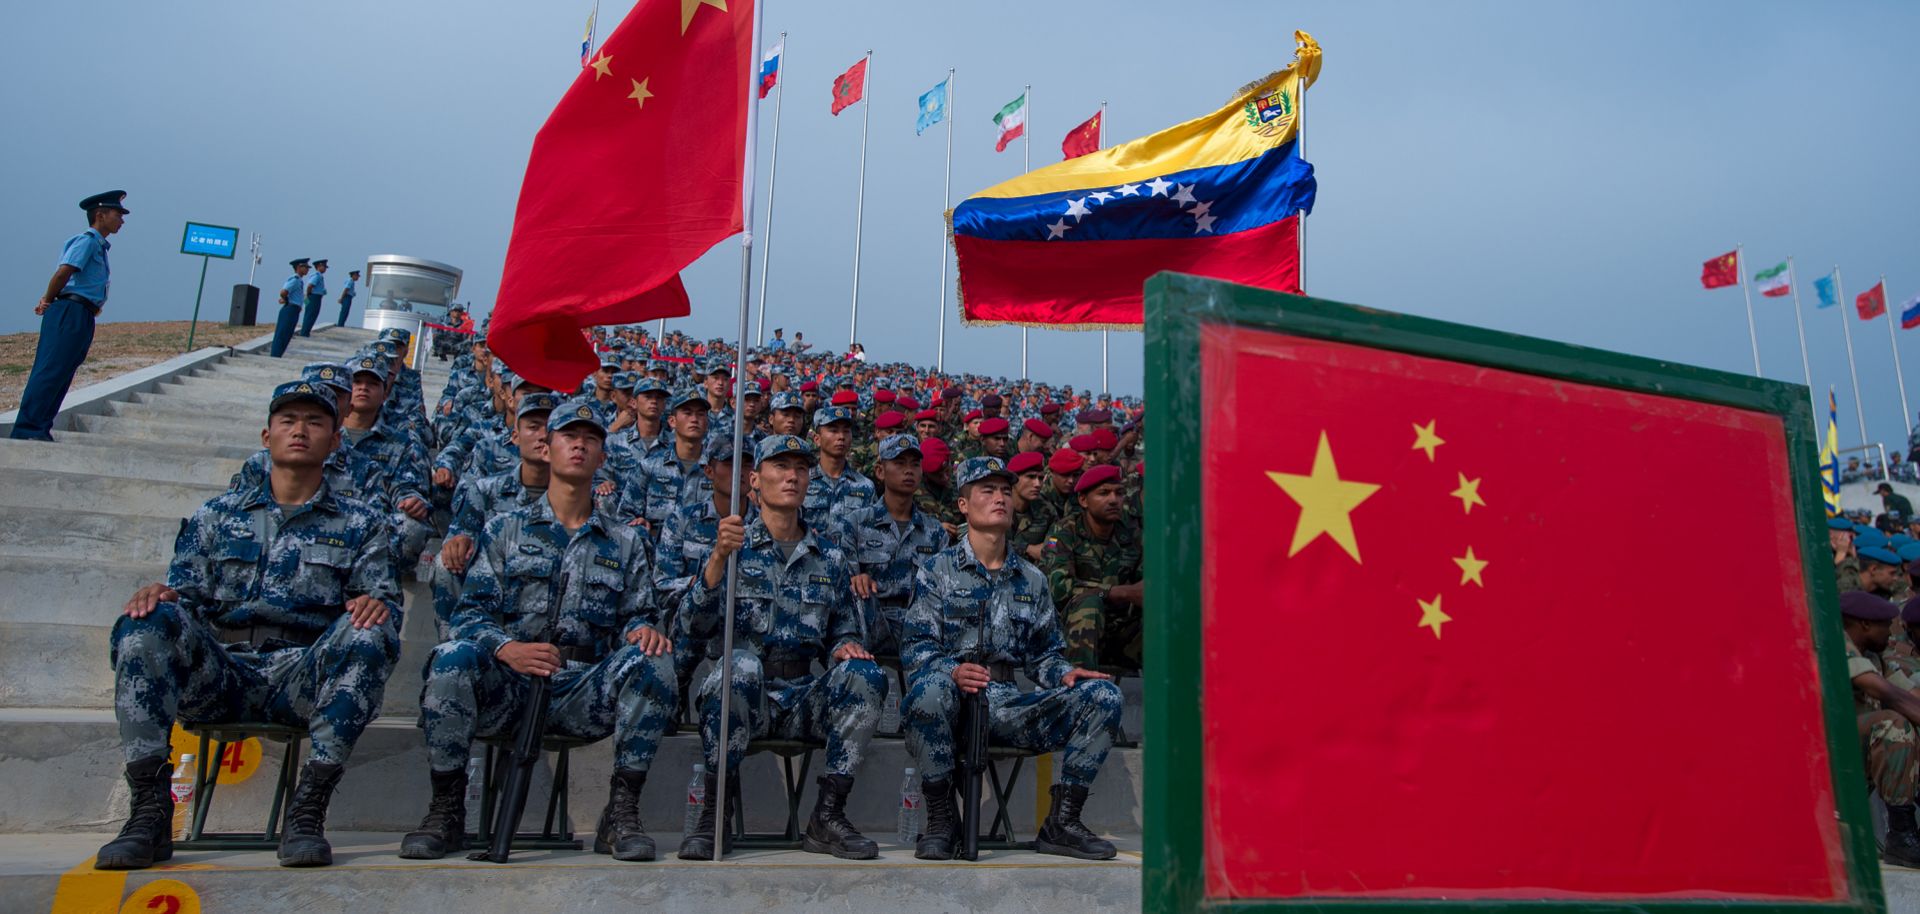 Venezuelan soldiers sit next to their Chinese counterparts during the opening ceremonies for the portion of the International Army Games held in China's Hubei province.